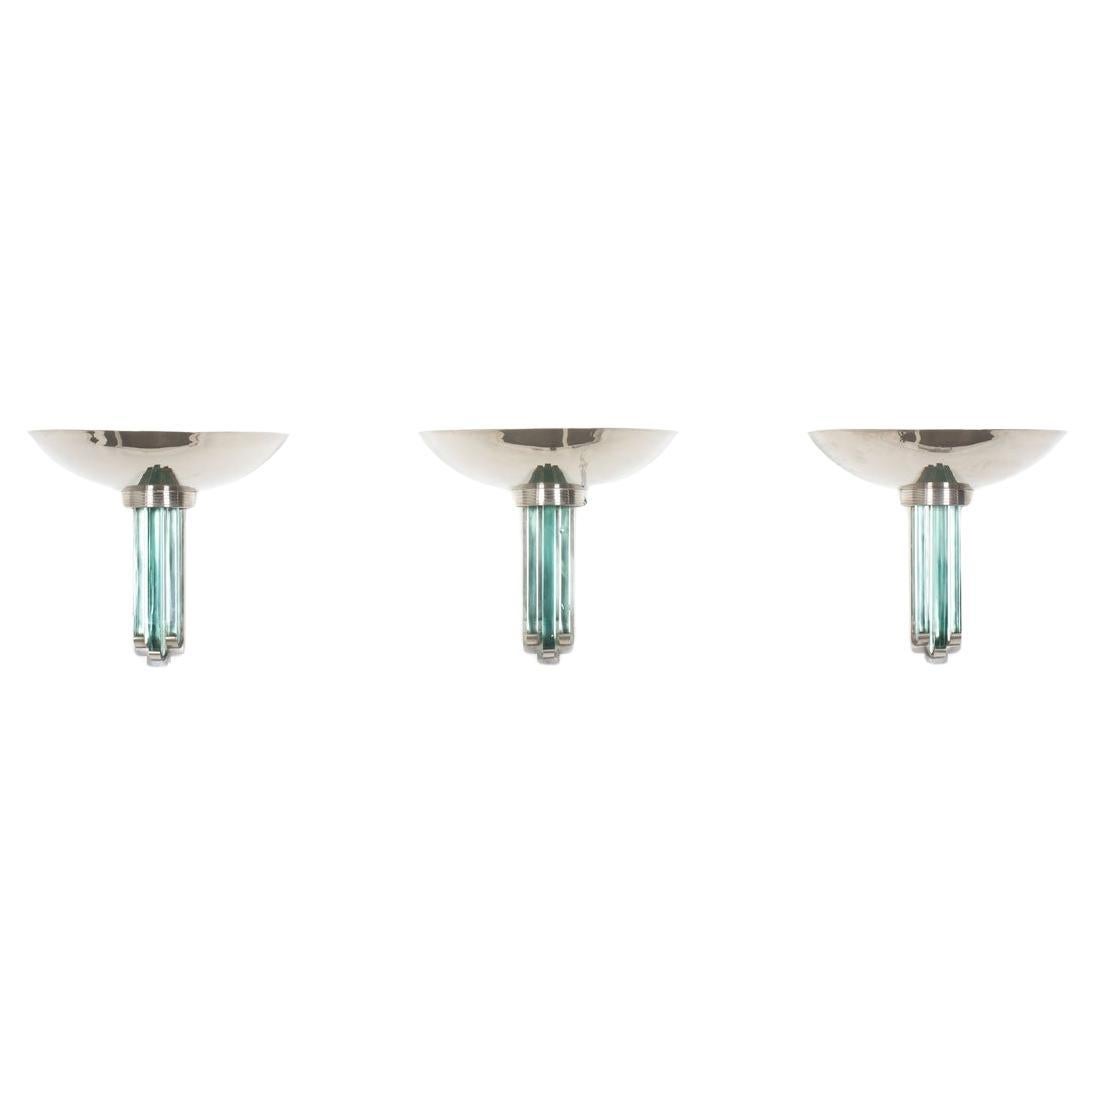 Set of 3 Art Deco wall lights in glass and metal, 1930s